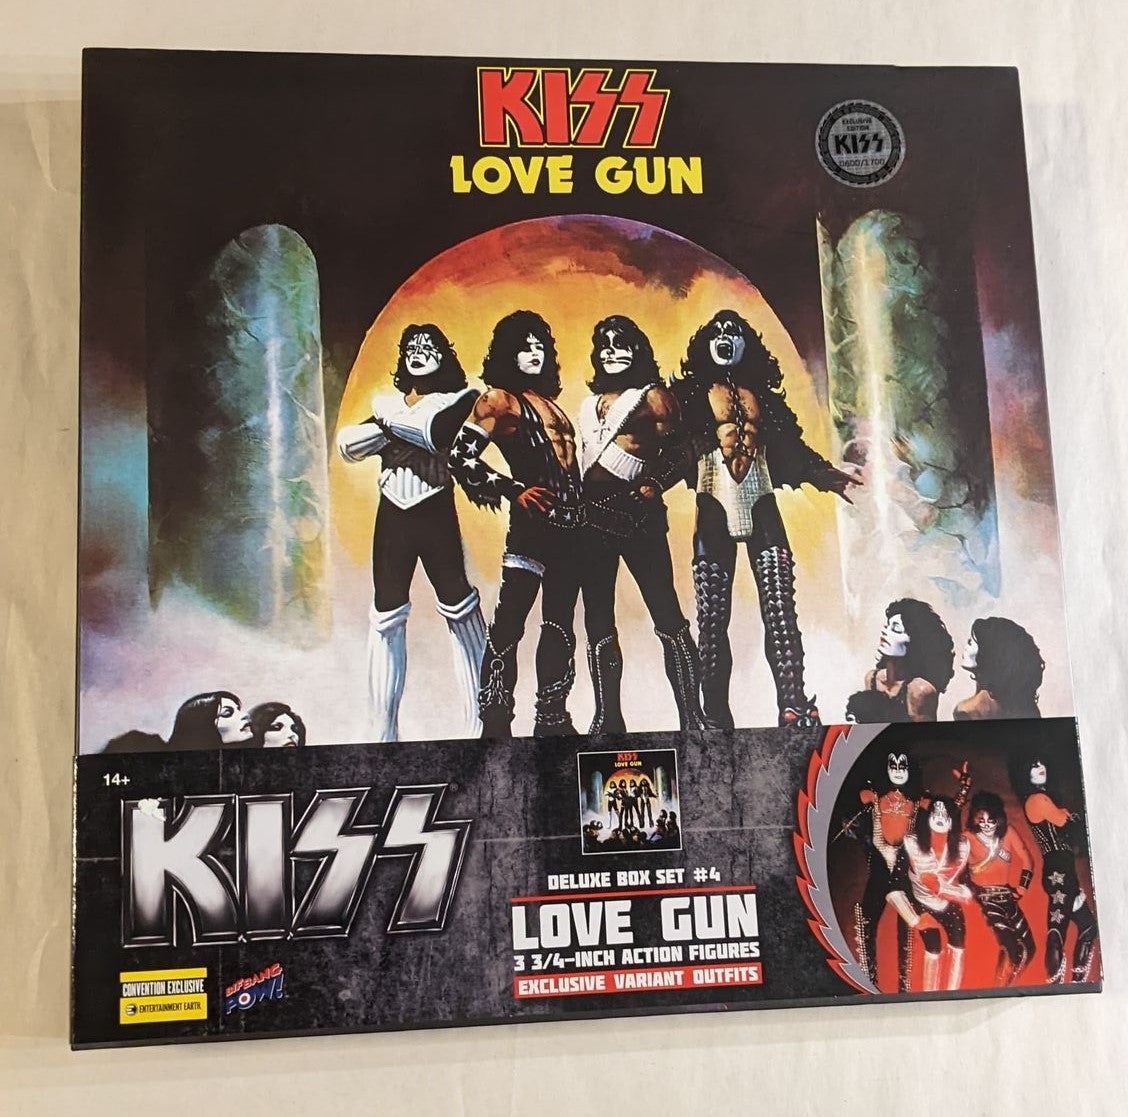 KISS Love Gun 3 3/4-Inch Action Figure Deluxe Box Set - Convention Exc